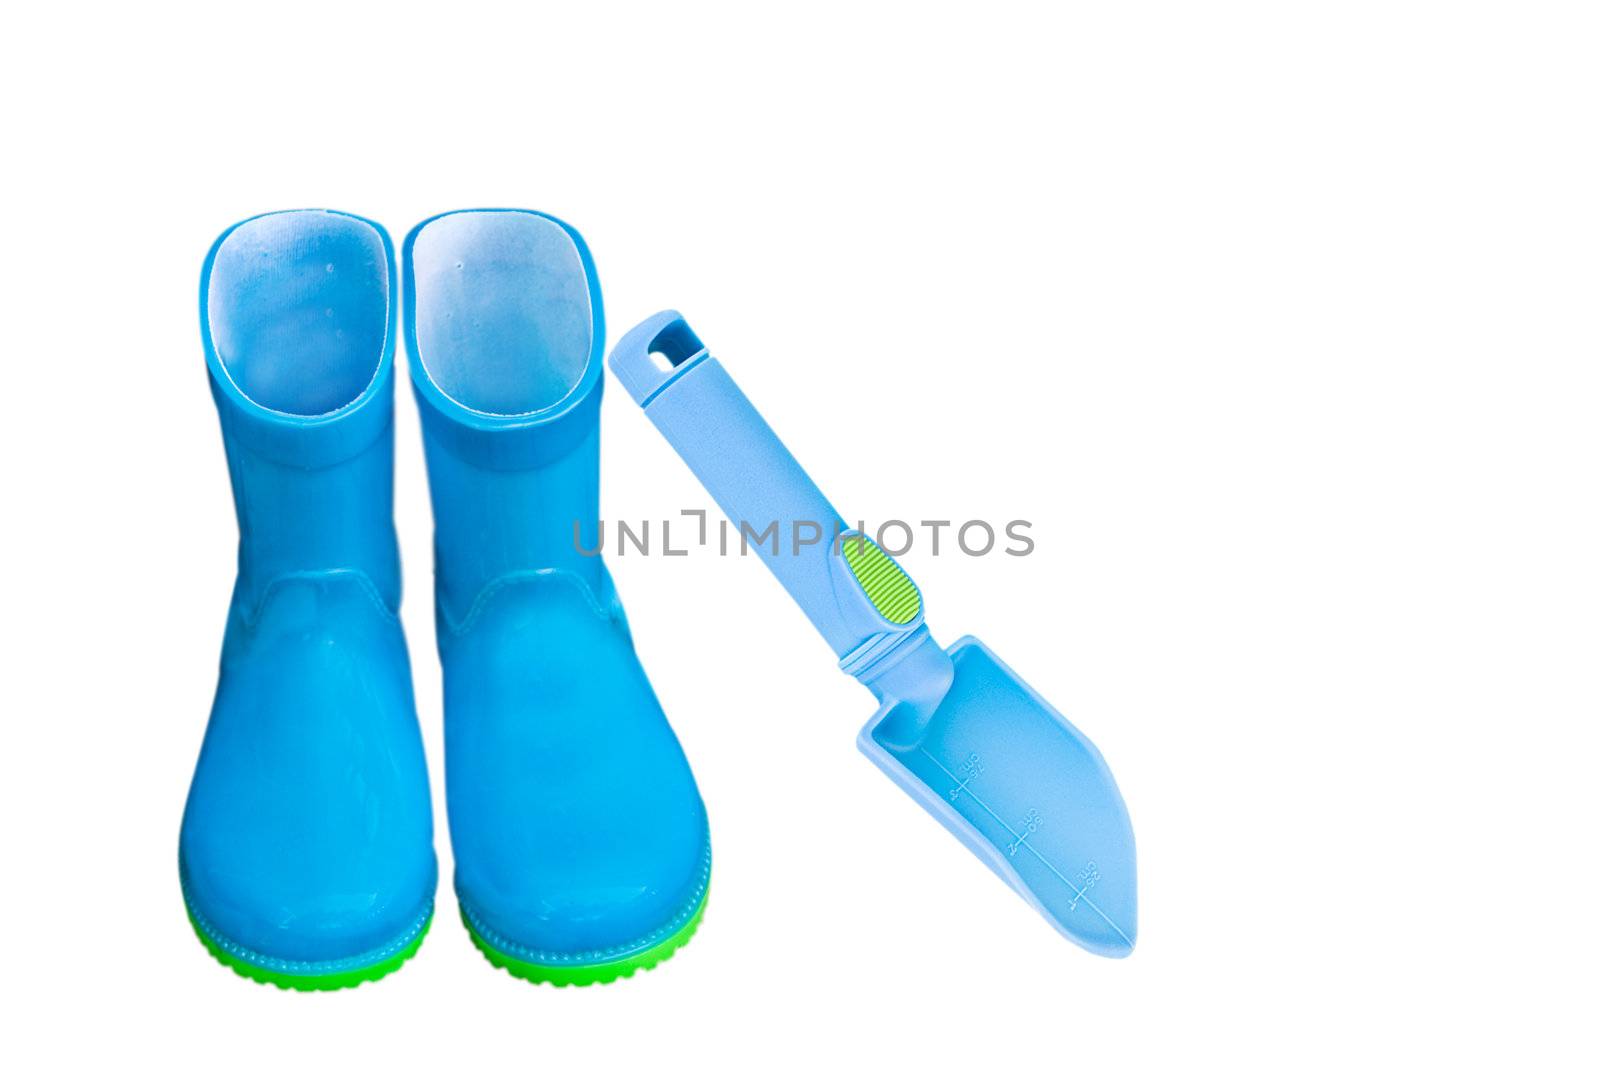 Child's rubber rain boots and garden trowel  by StephanieFrey